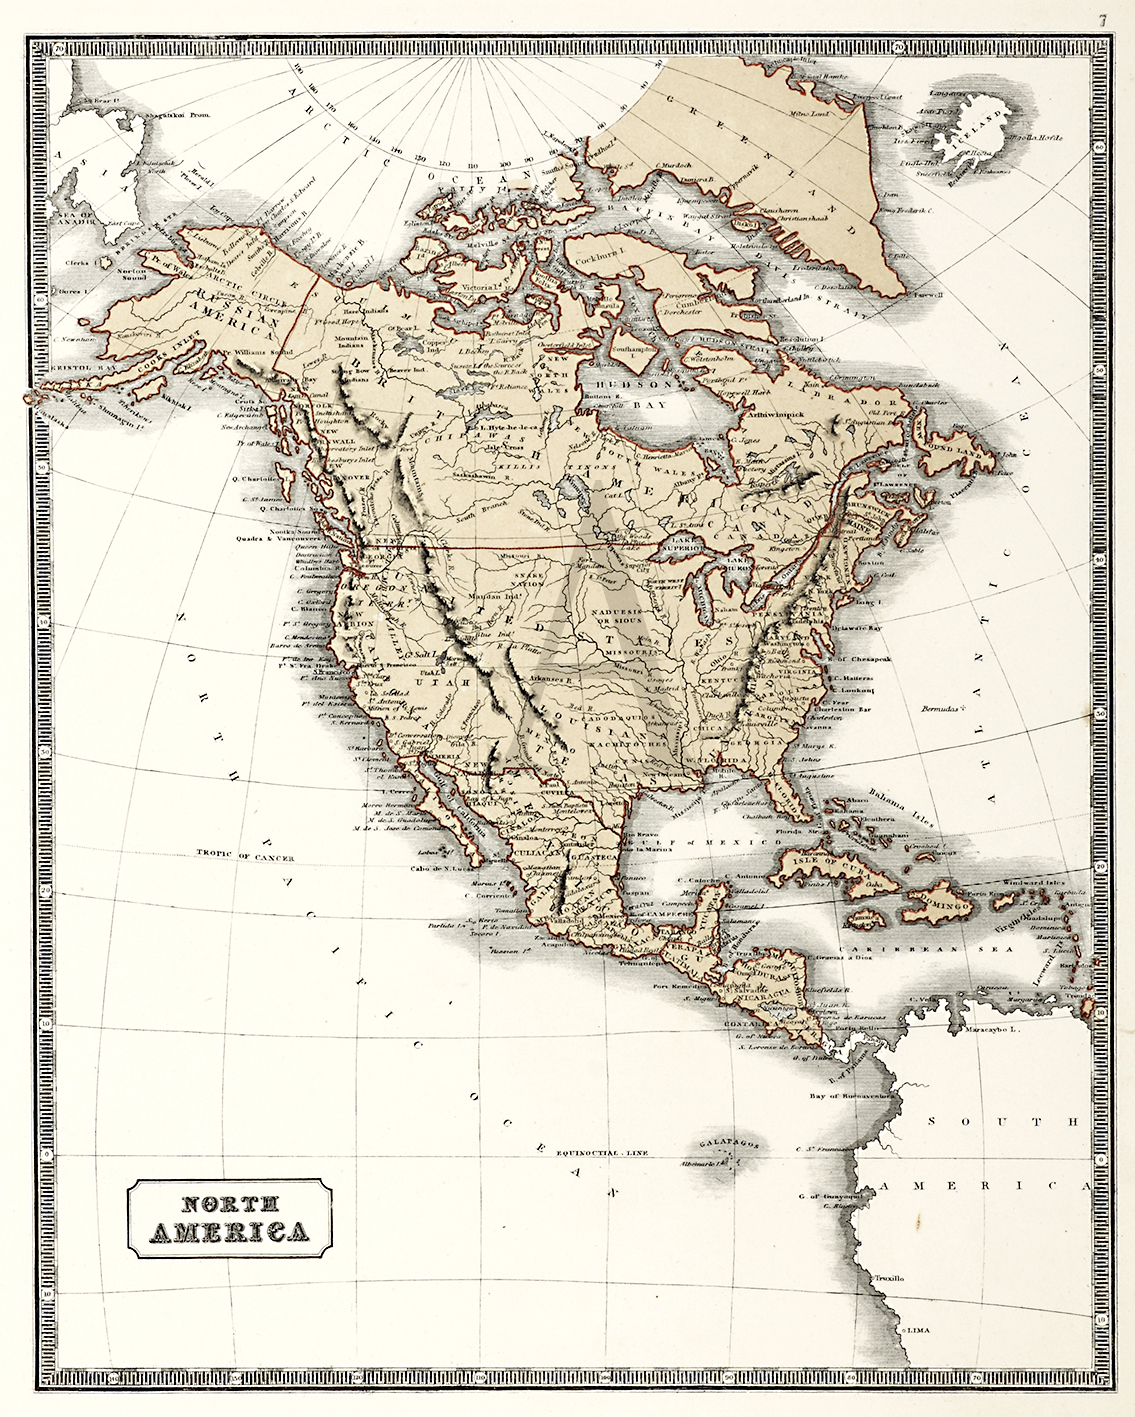 North America - Antique Print from 1863